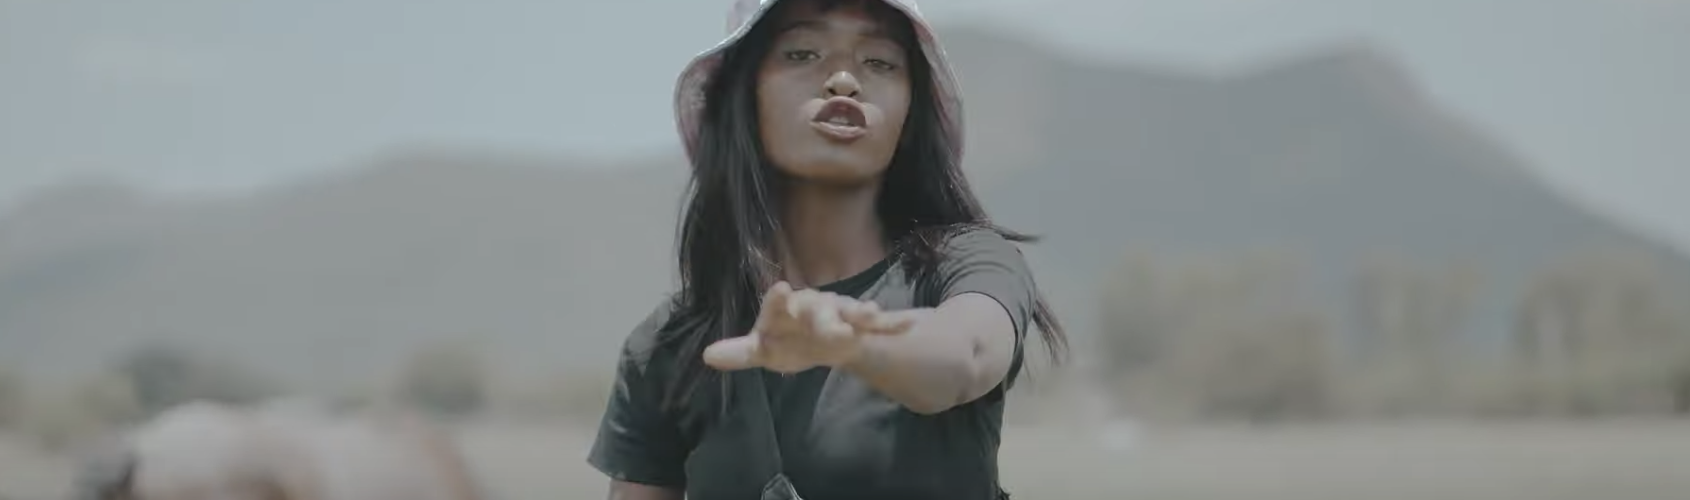 Watch Kate the Aesthete’s  “Ke Mrepa Dawg (KMD)” featuring CoolNerrd (Official Music Video)